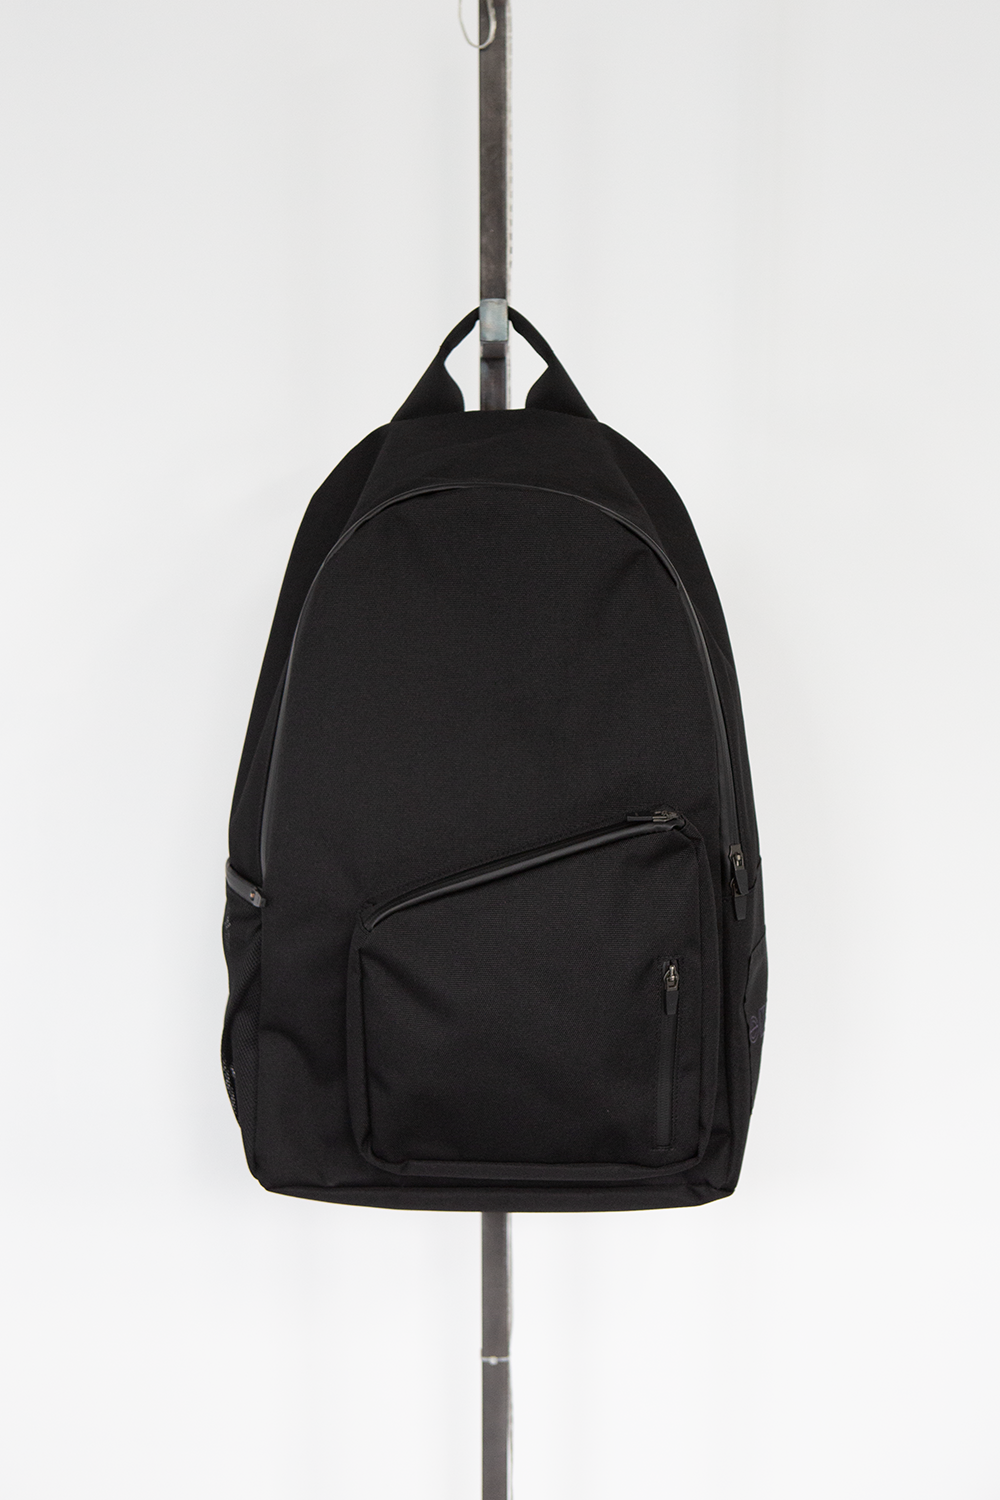 MPa DAY PACK (Black)